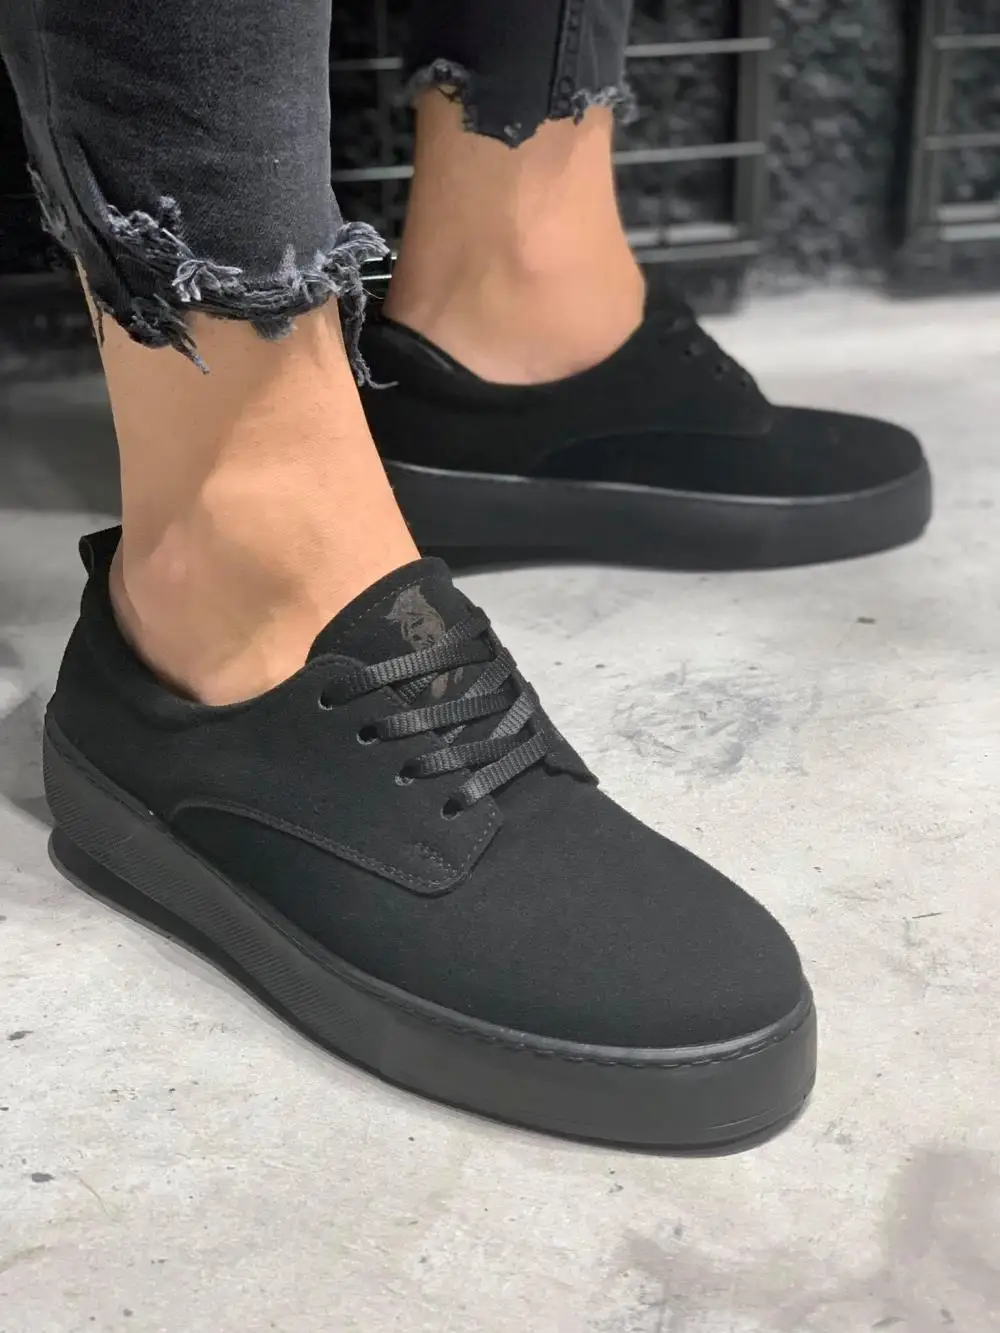 

KNACK Black Daily Shoes Van for Men 077 Suede Rubber Lace-up Fall & Spring Comfortable Casual Sport Footwear Sneaker Gel Venus Timberland Polo Fast and Free Shipping High Quality Fabric New Season Fashion Trendy 2021